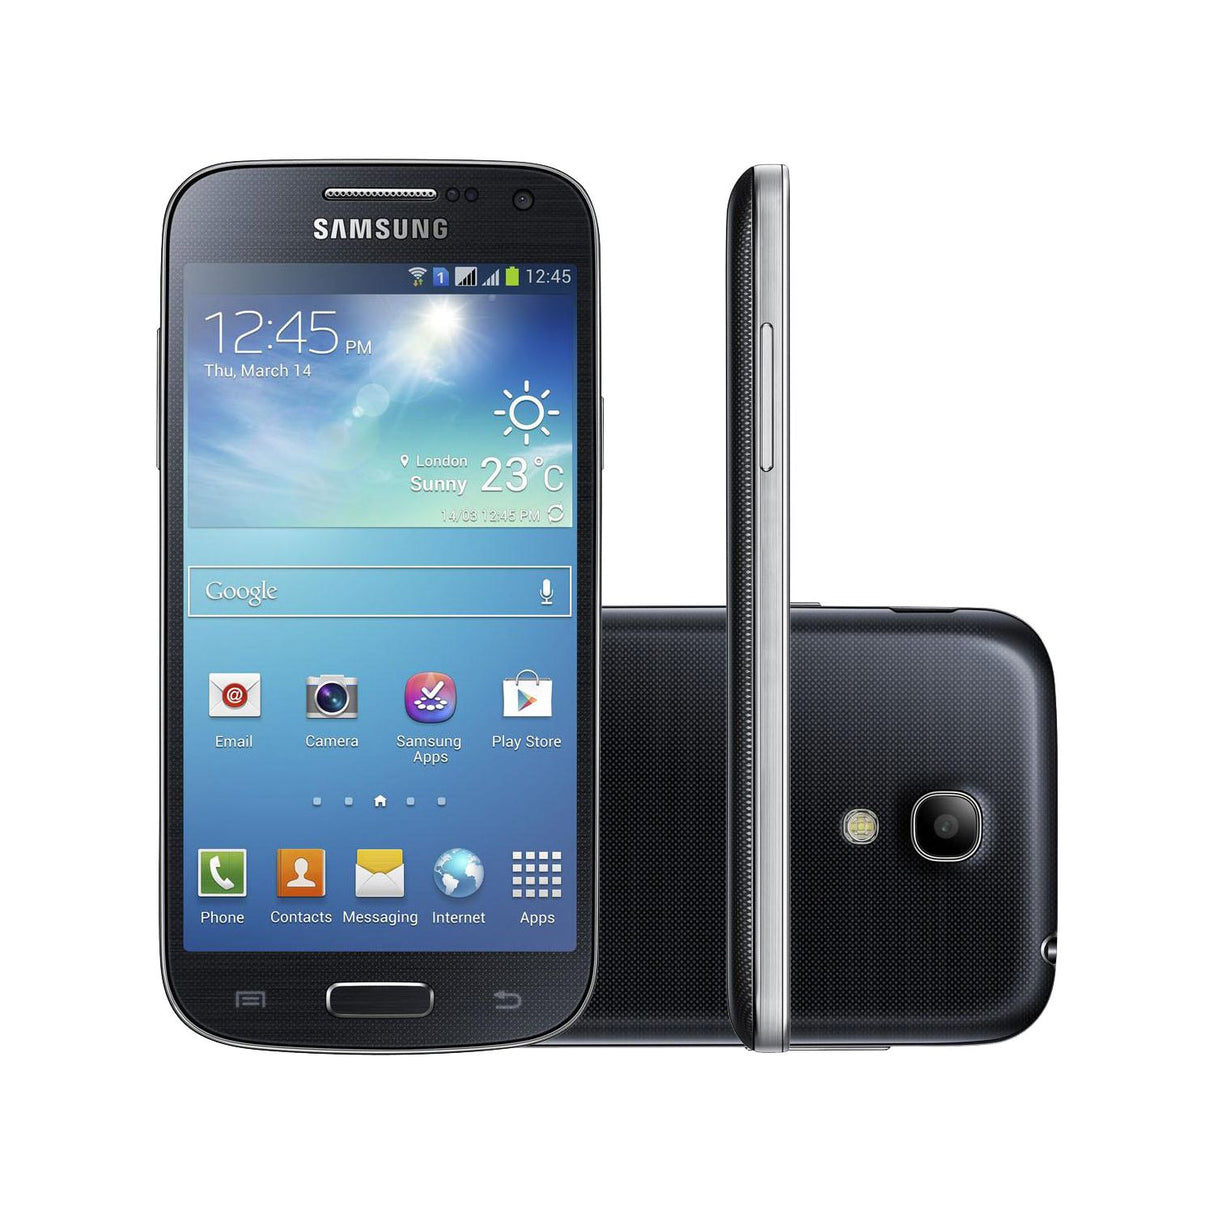 Samsung GALAXY S4 Mini Android Phone 8 GB - Black frost - GSM